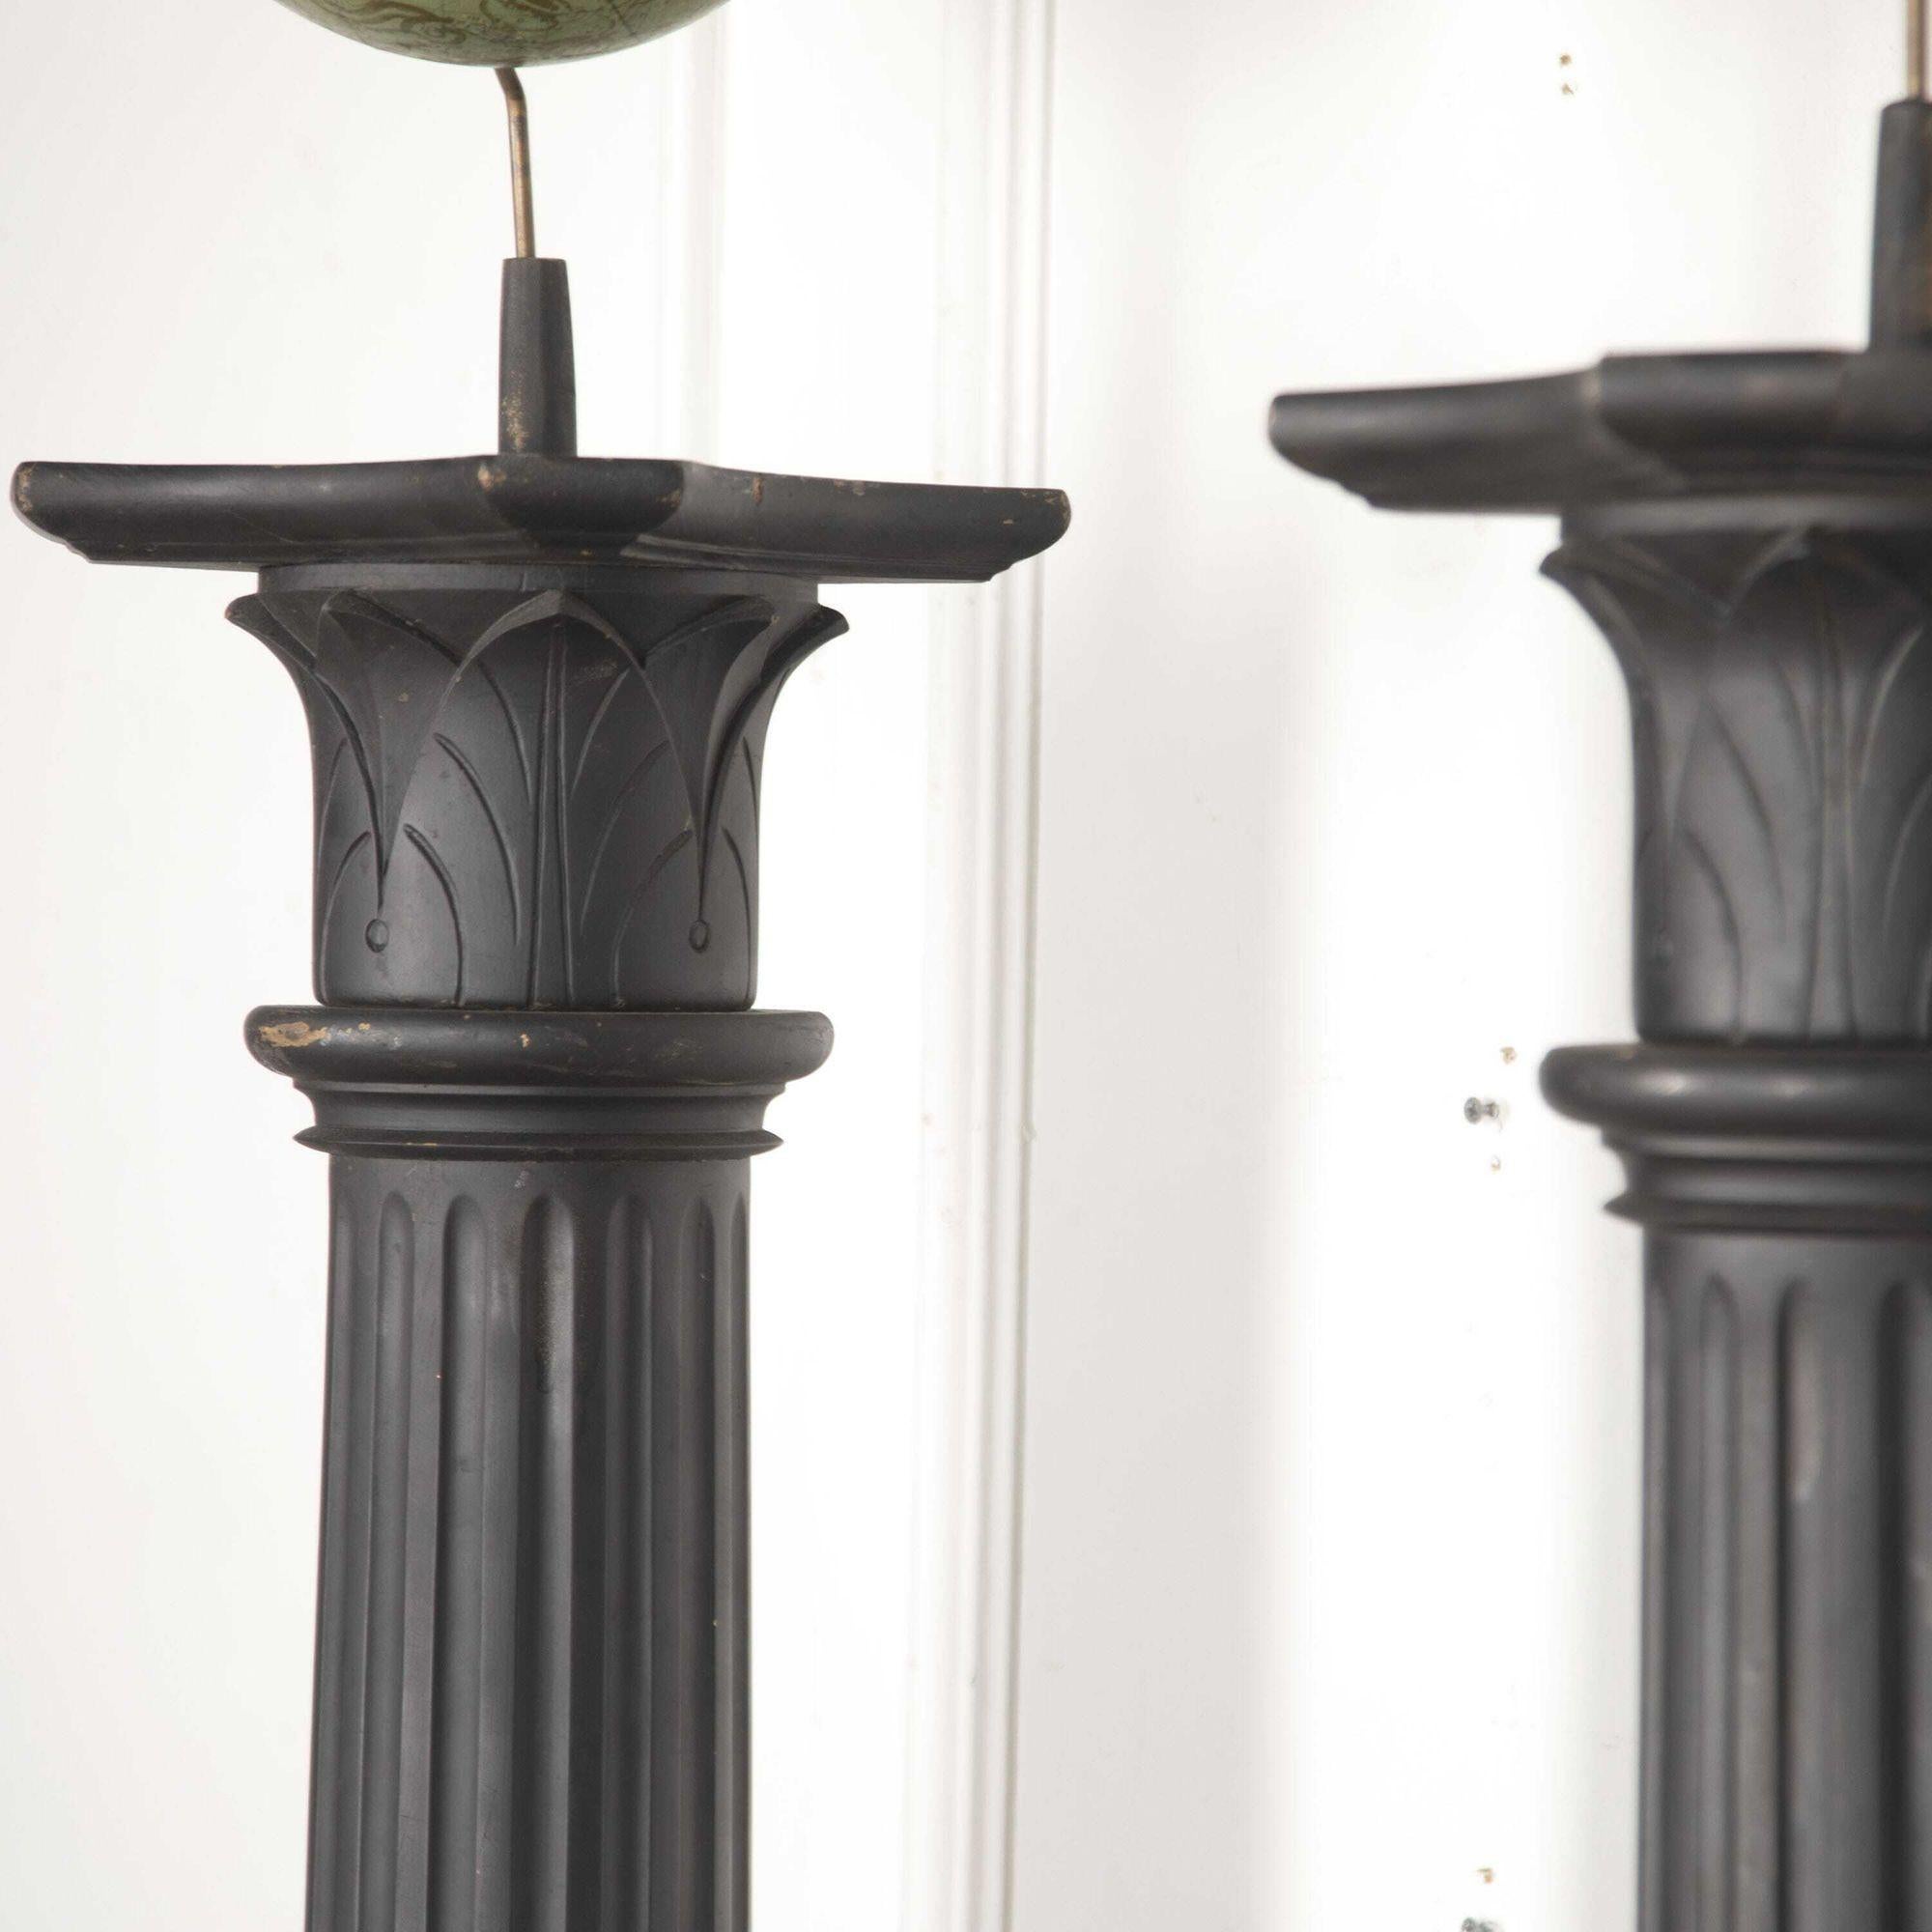 Pair of American terrestrial and celestial globes mounted on column stands. 
The globes were made by Weber Costello Co. - USA. The ebonised stands feature deeply carved and fluted details. 
This unique pair will have a majestic presence in any